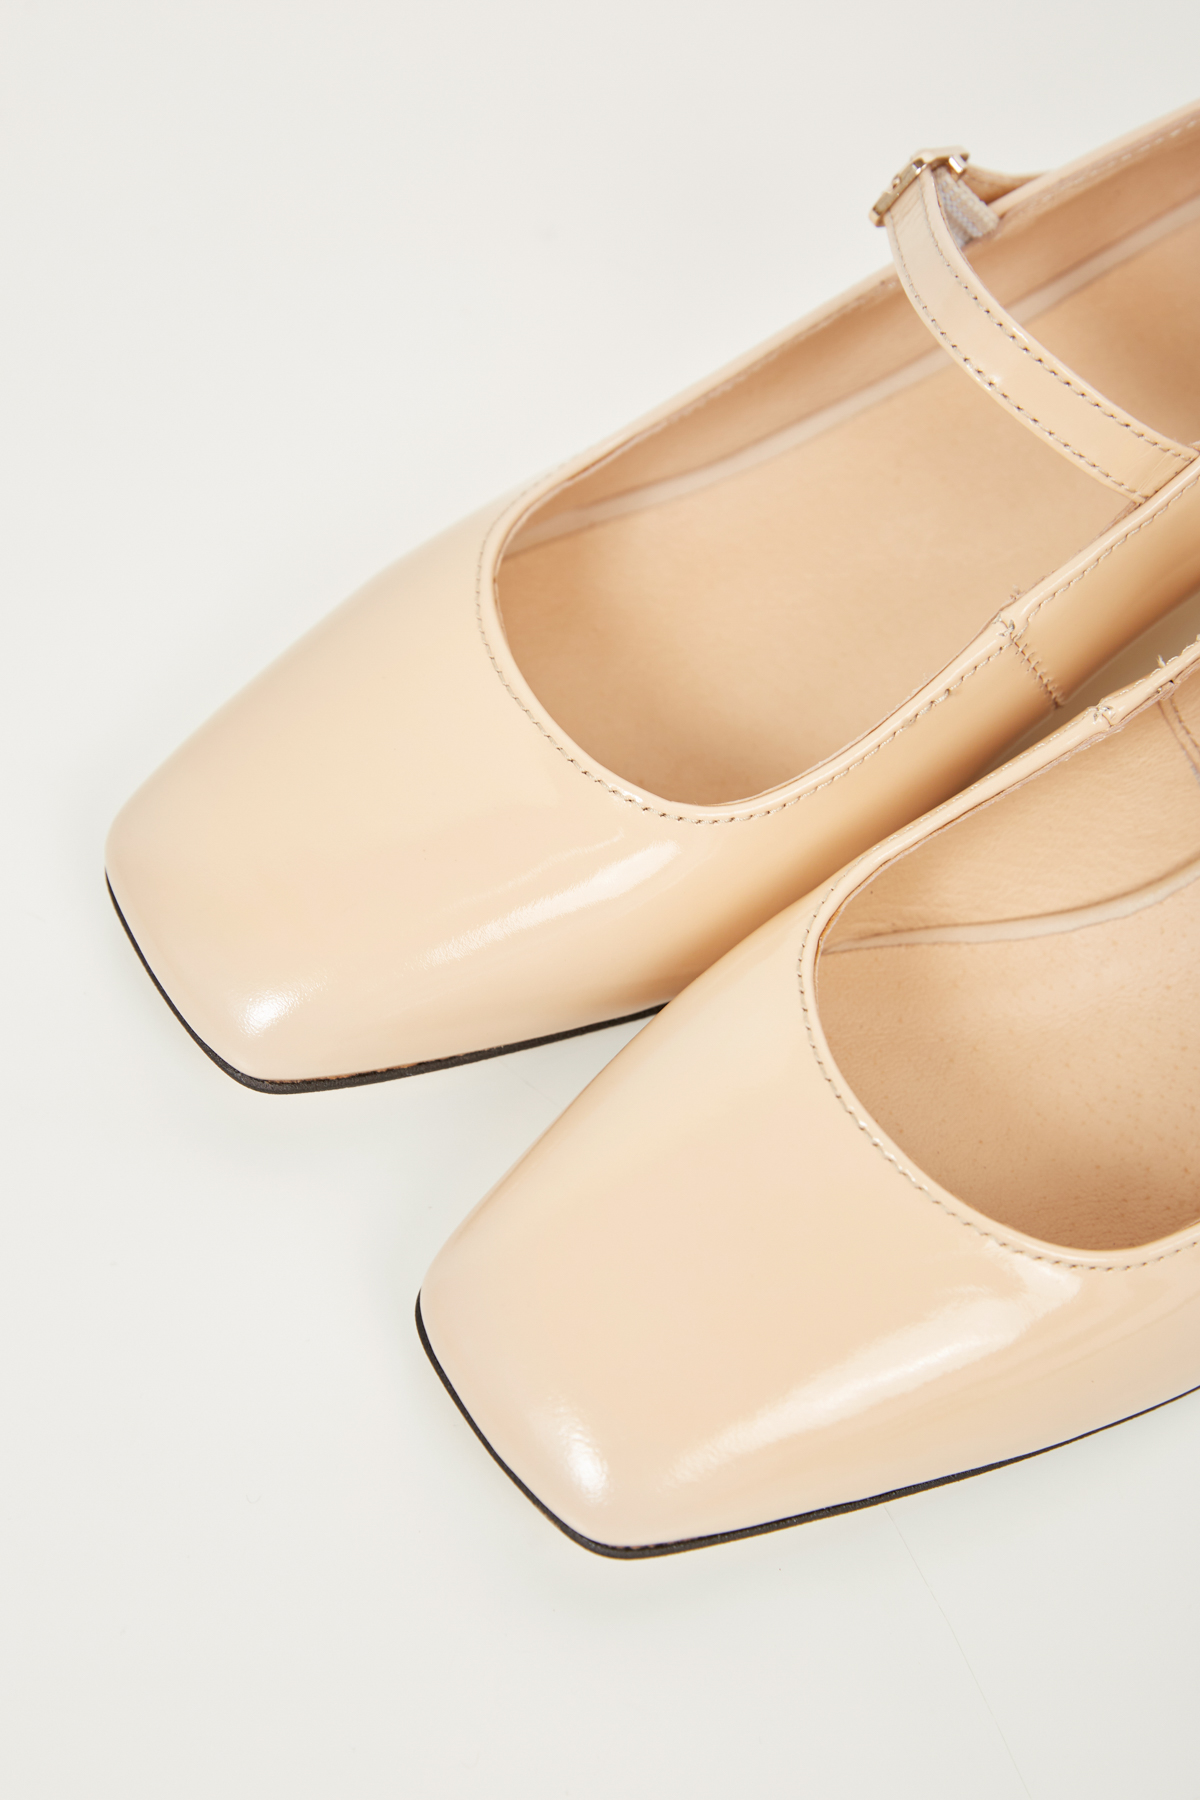 Beige patent leather shoes, photo 4